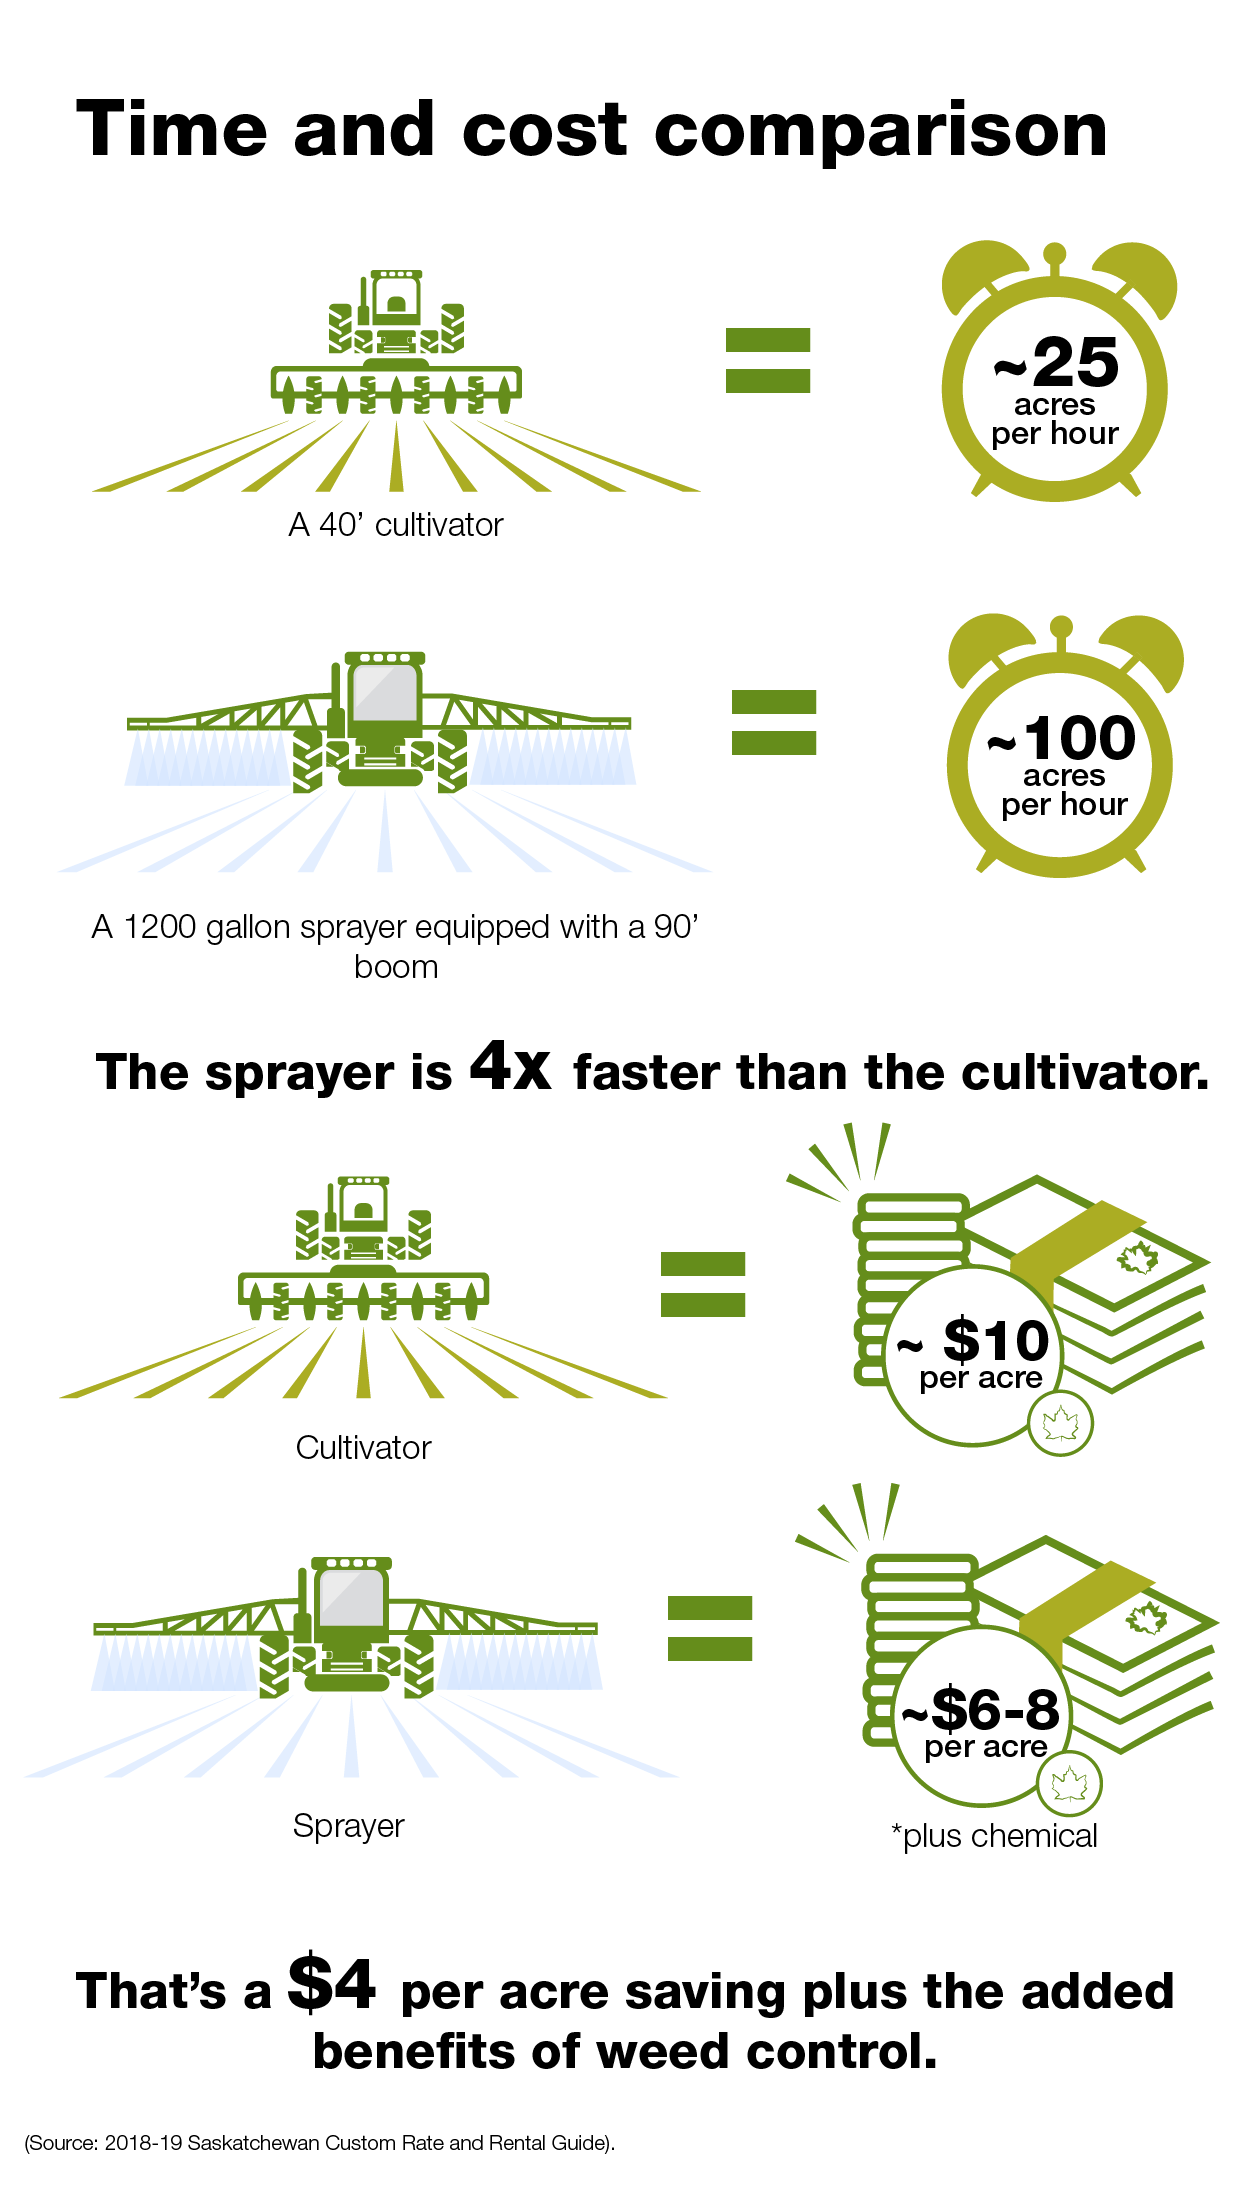 An infographic outlining the time and cost comparisons of spraying before seeding